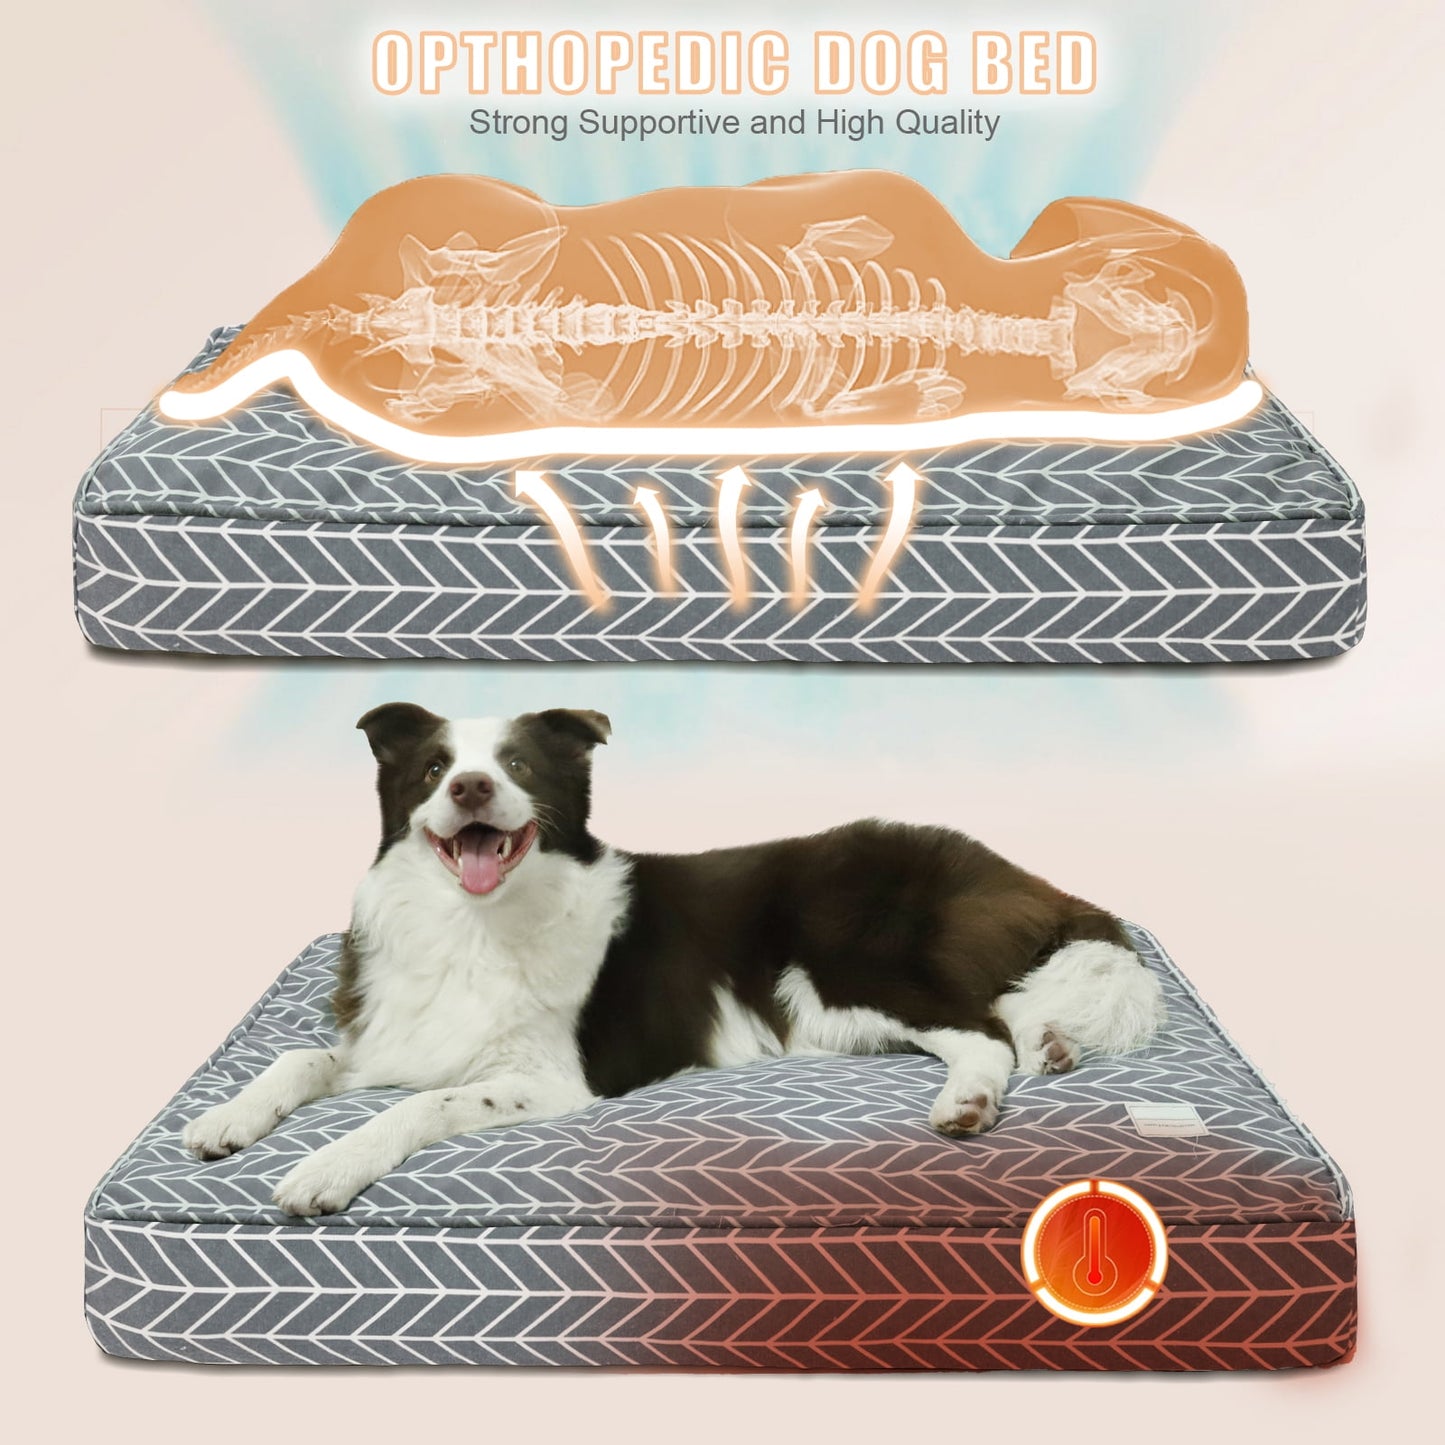 Exclusivo Mezcla Orthopedic Dog Bed for Small Dogs, Shredded Memory Foam Supportive Therapy Fillings Pet Bed, Soft Warm Washable Cat Cuddler Bed, Arrow 24''x18''